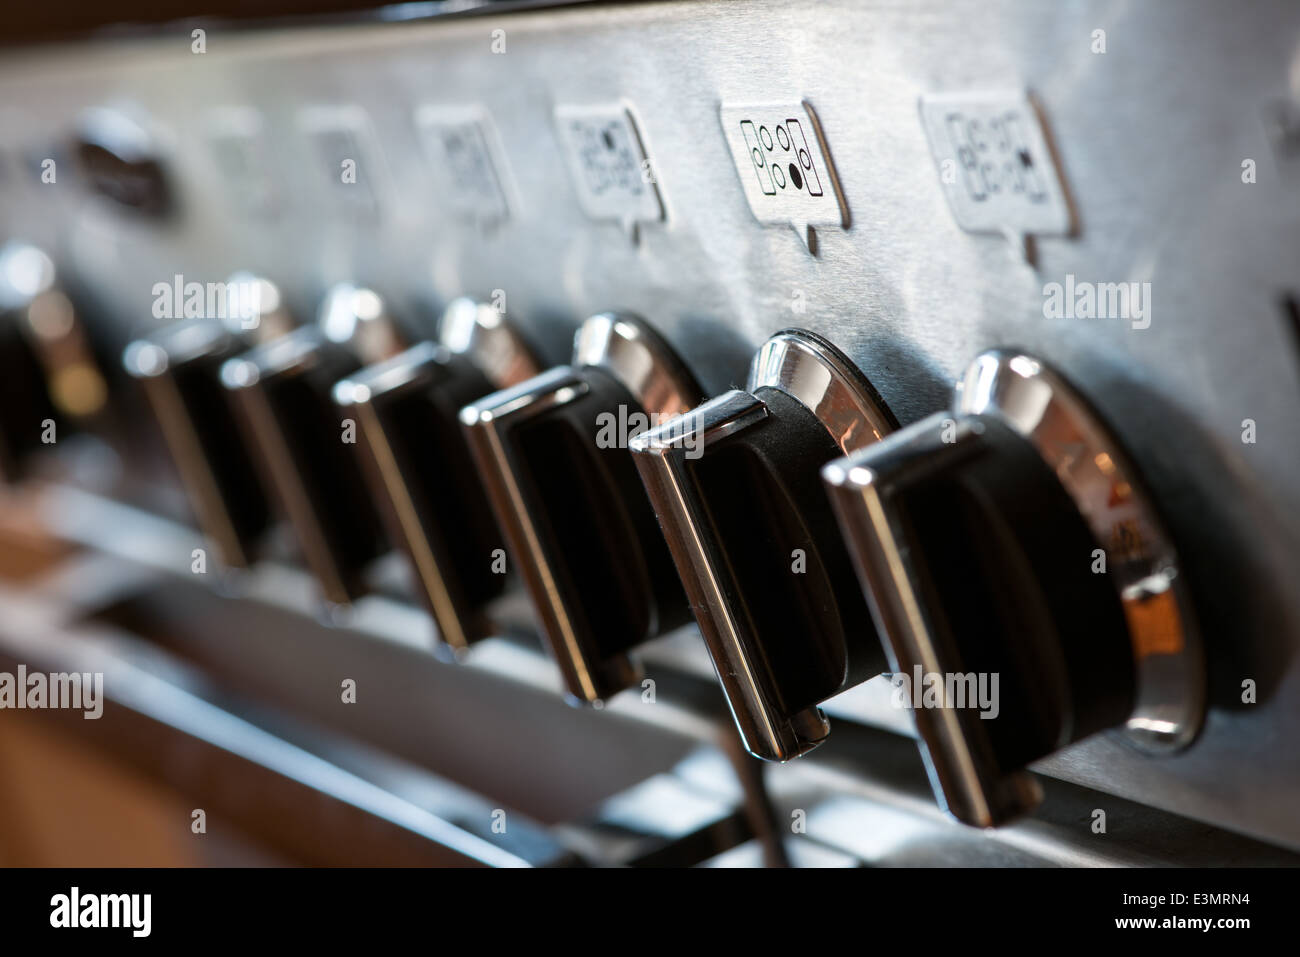 The control knobs on the front of a gas range cooker Stock Photo